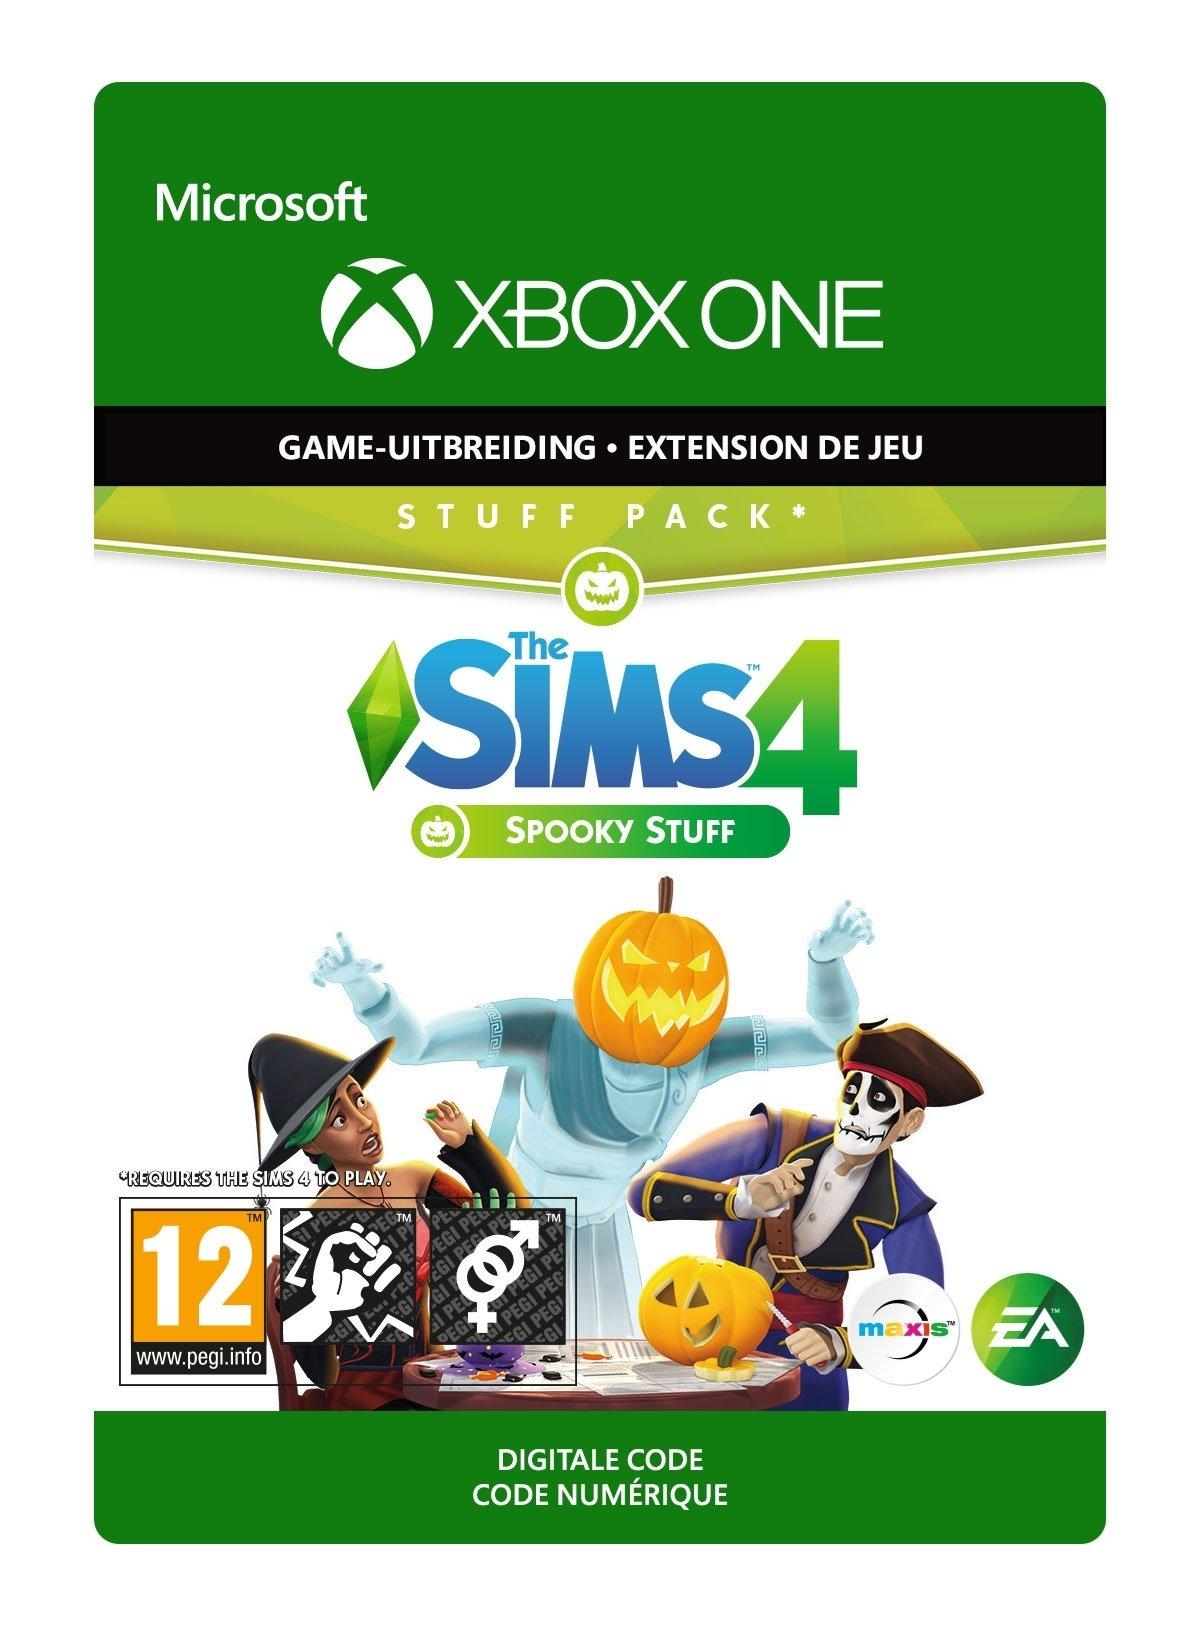 The Sims 4: Spooky stuff - Xbox One - Add-on | 7D4-00257 (81068f7c-3ce5-1440-8ccb-bcc4e01d02a2)